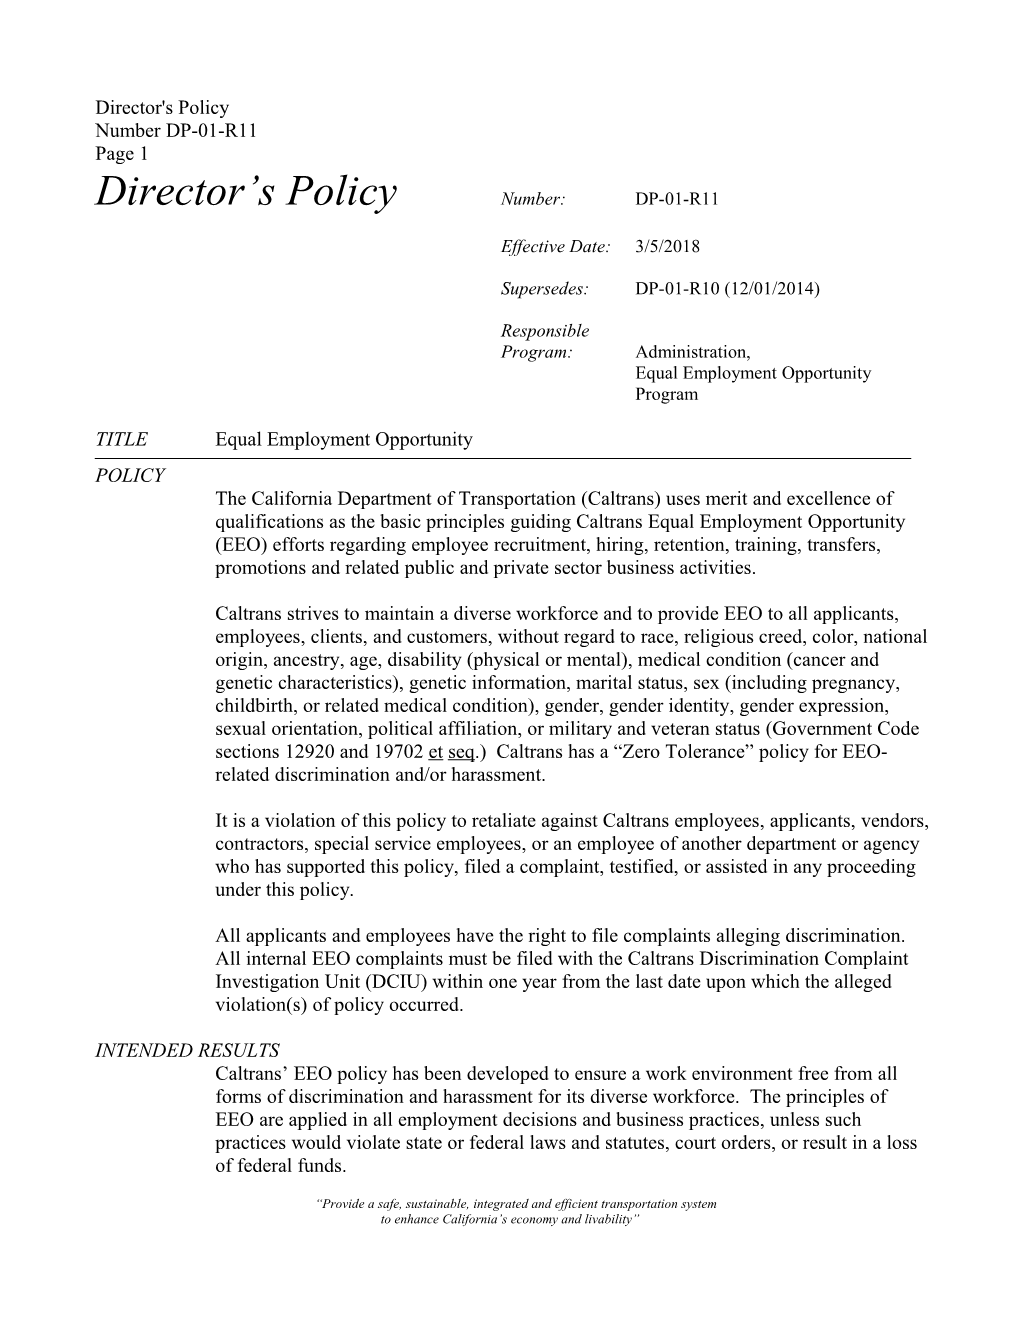 Director's Policy Template